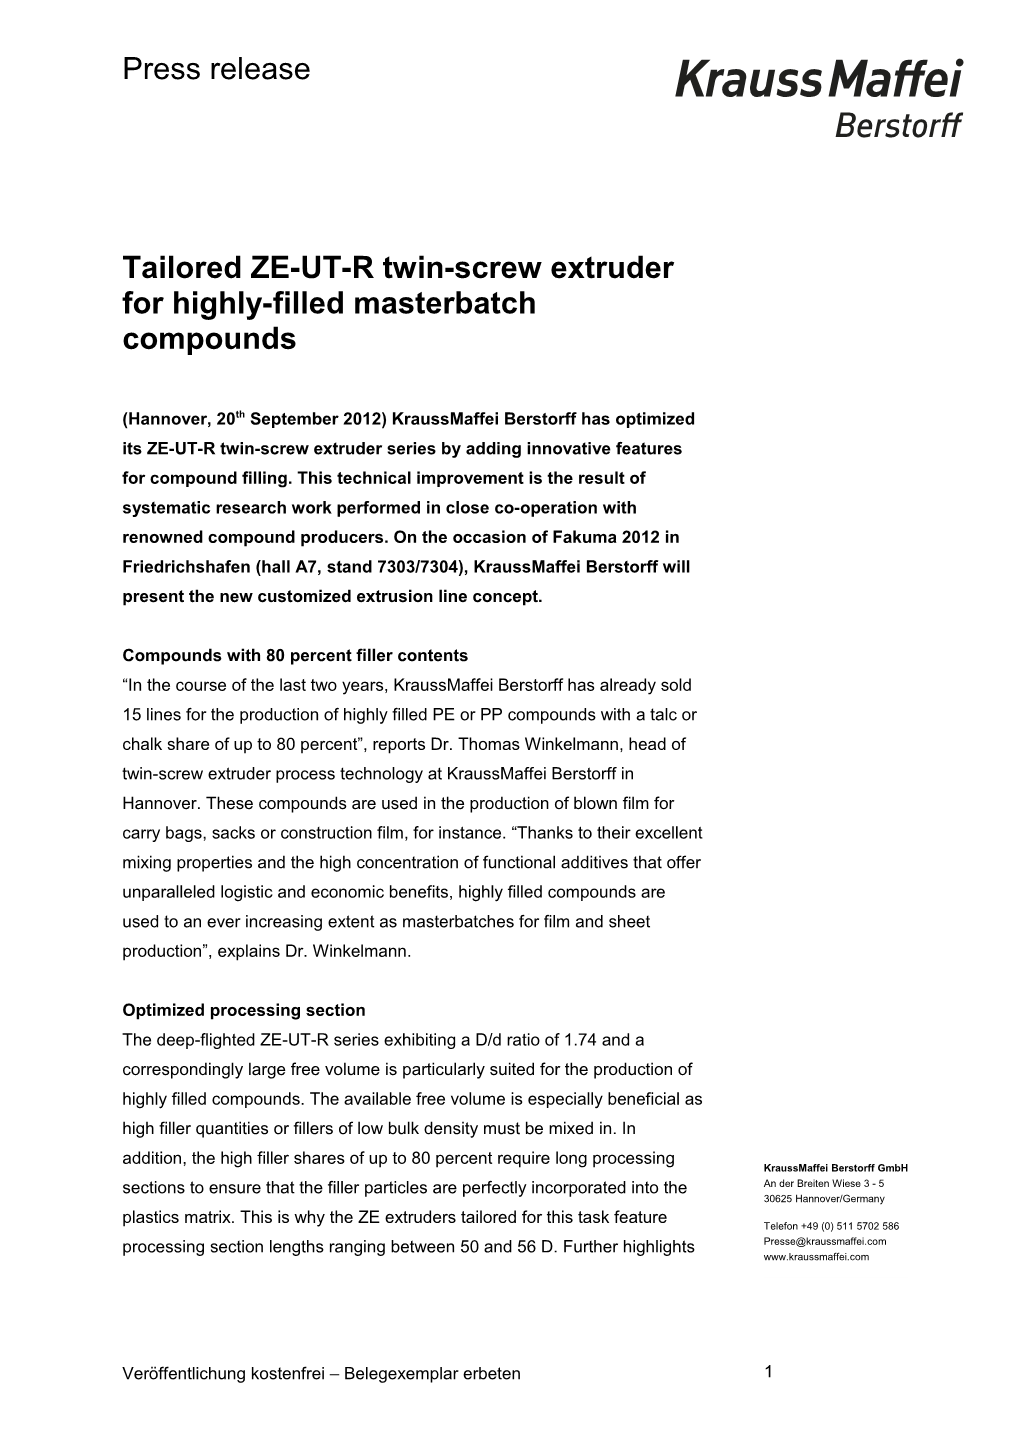 Tailored ZE-UT-R Twin-Screw Extruder for Highly-Filled Masterbatch Compounds